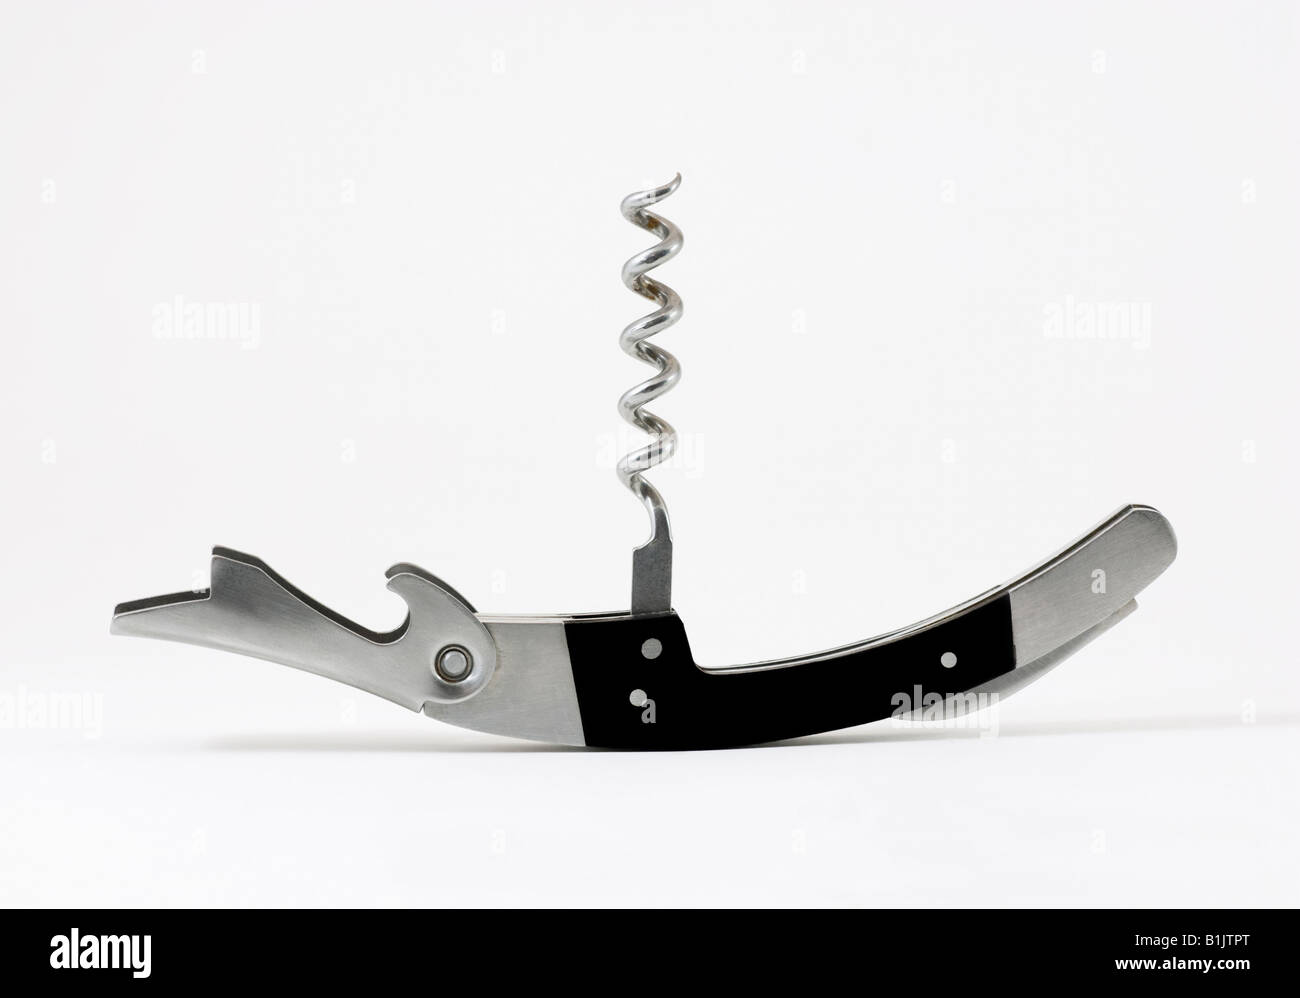 A corkscrew and bottle opener Stock Photo